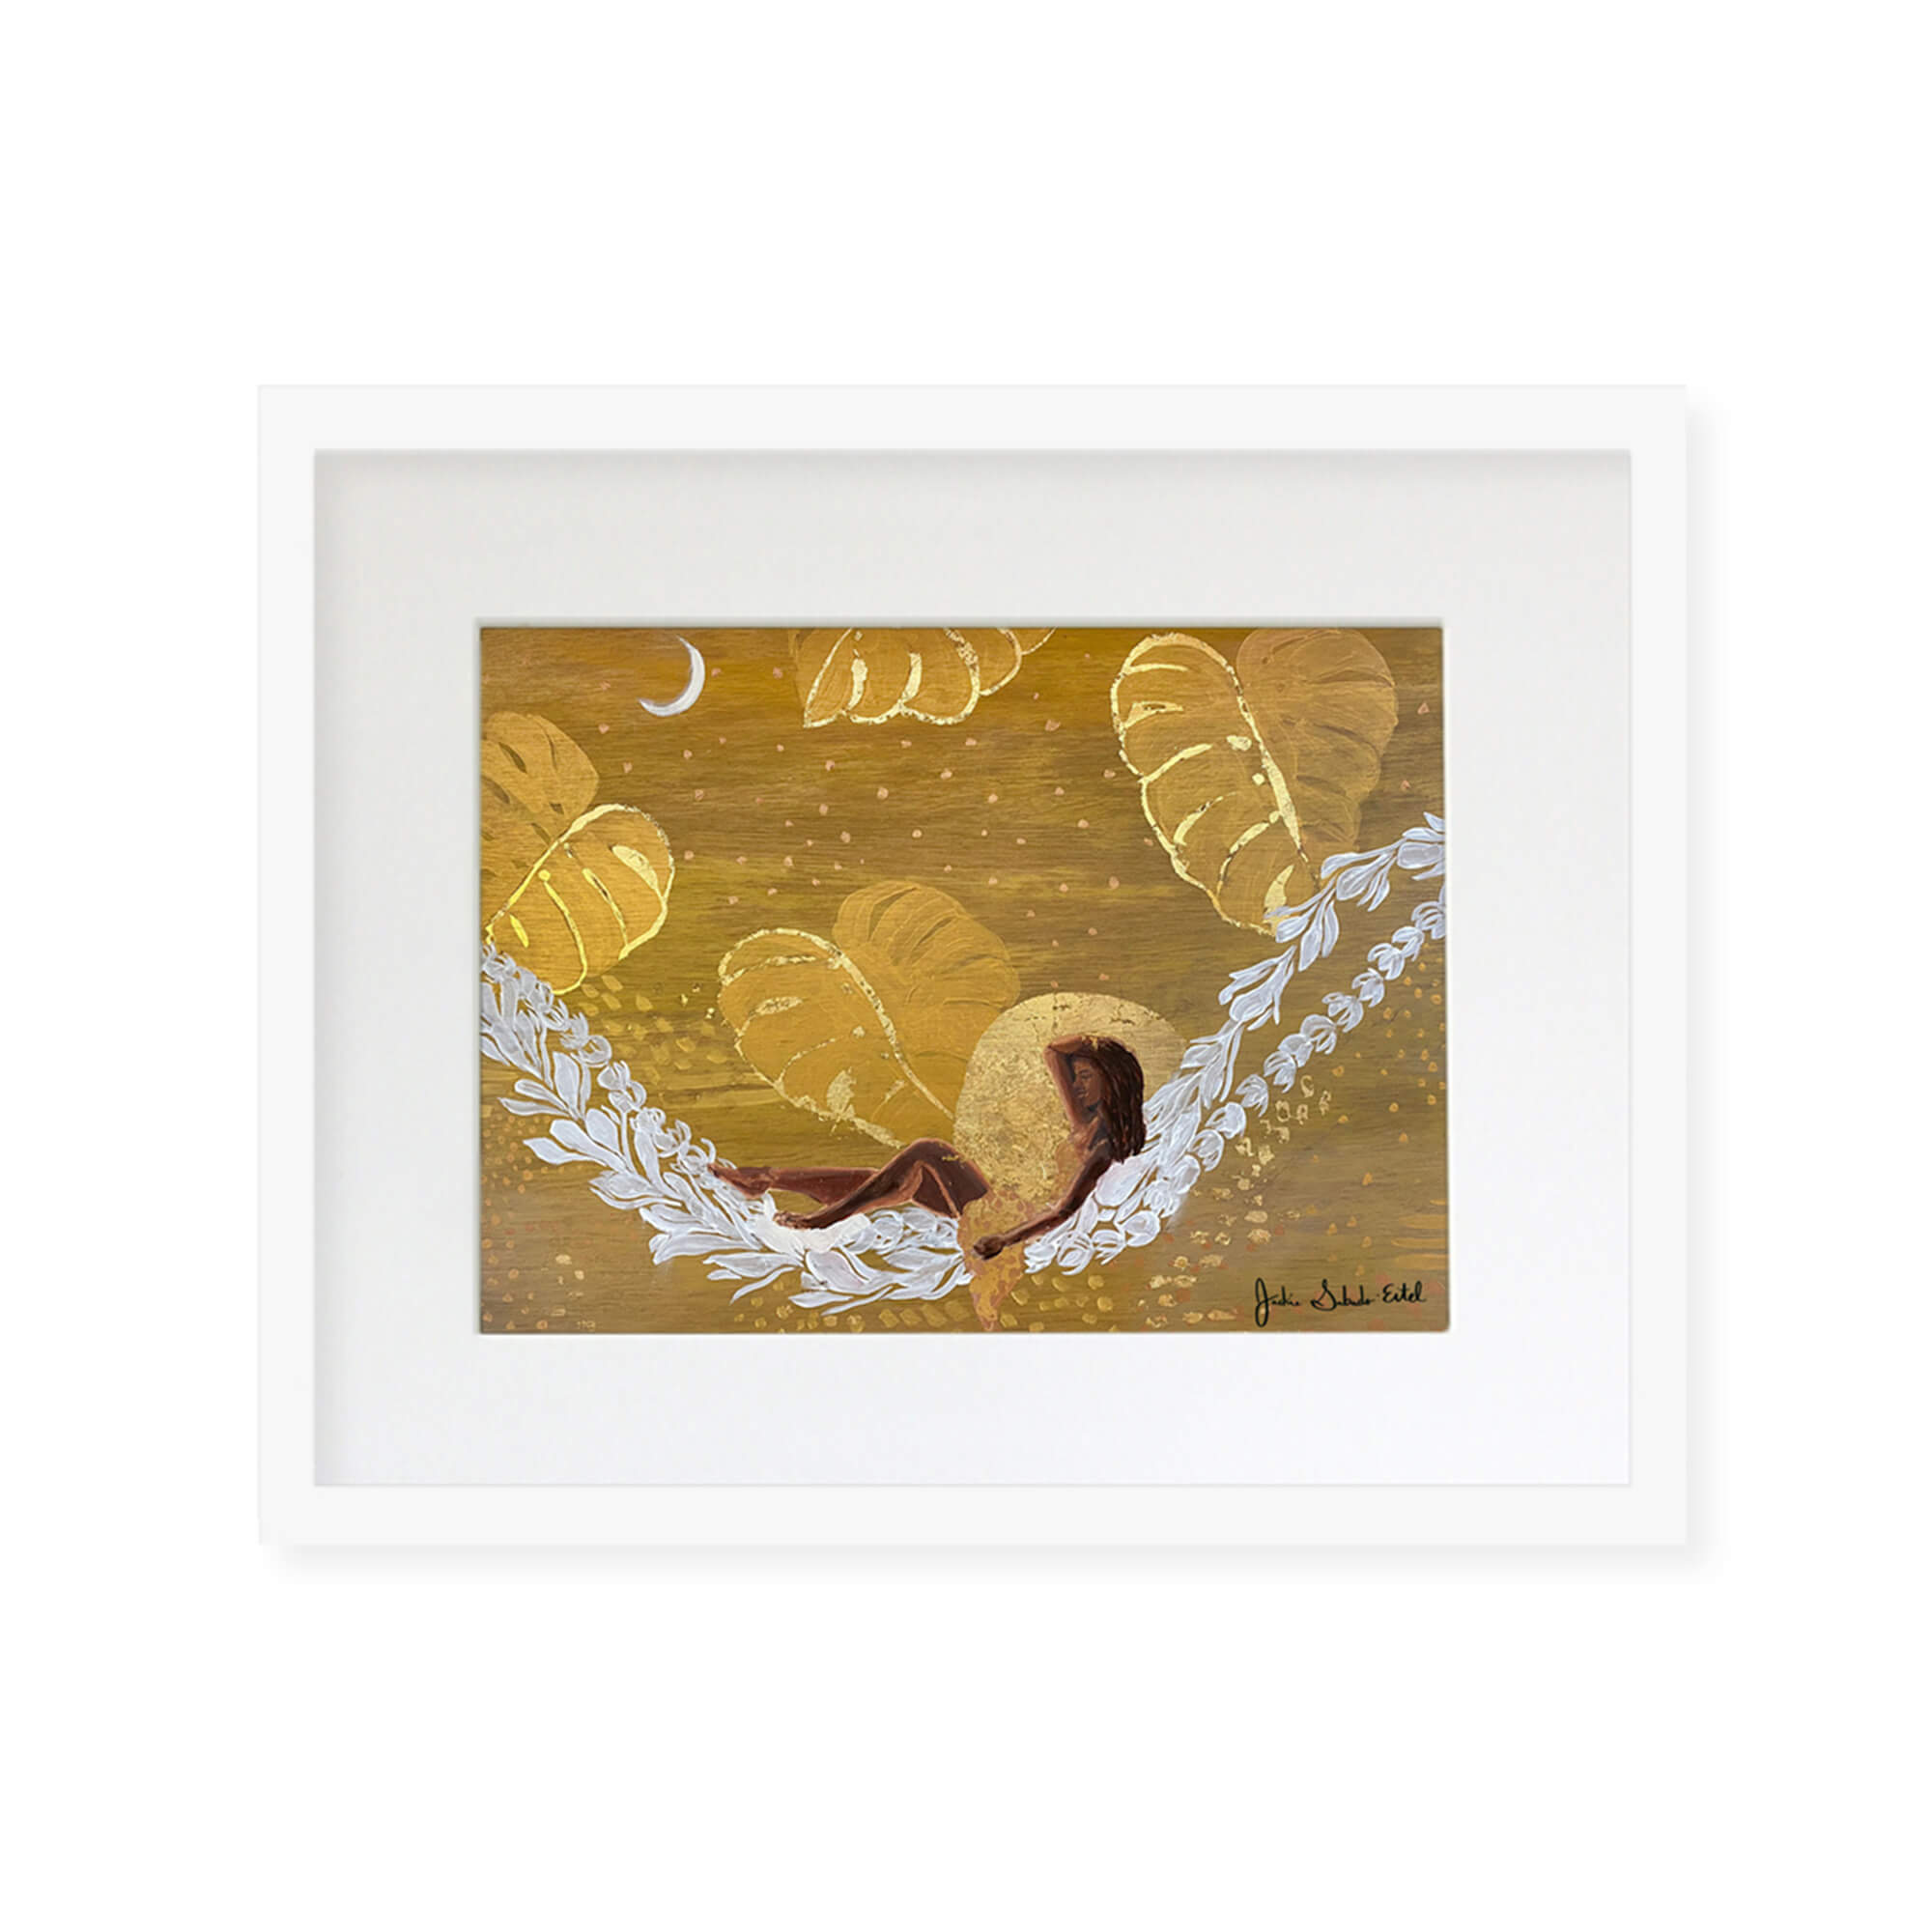 A framed matted art print featuring a woman relaxing on a lei hammock with monstera leaves backdrop and some gold touchups by Hawaii artist Jackie Eitel